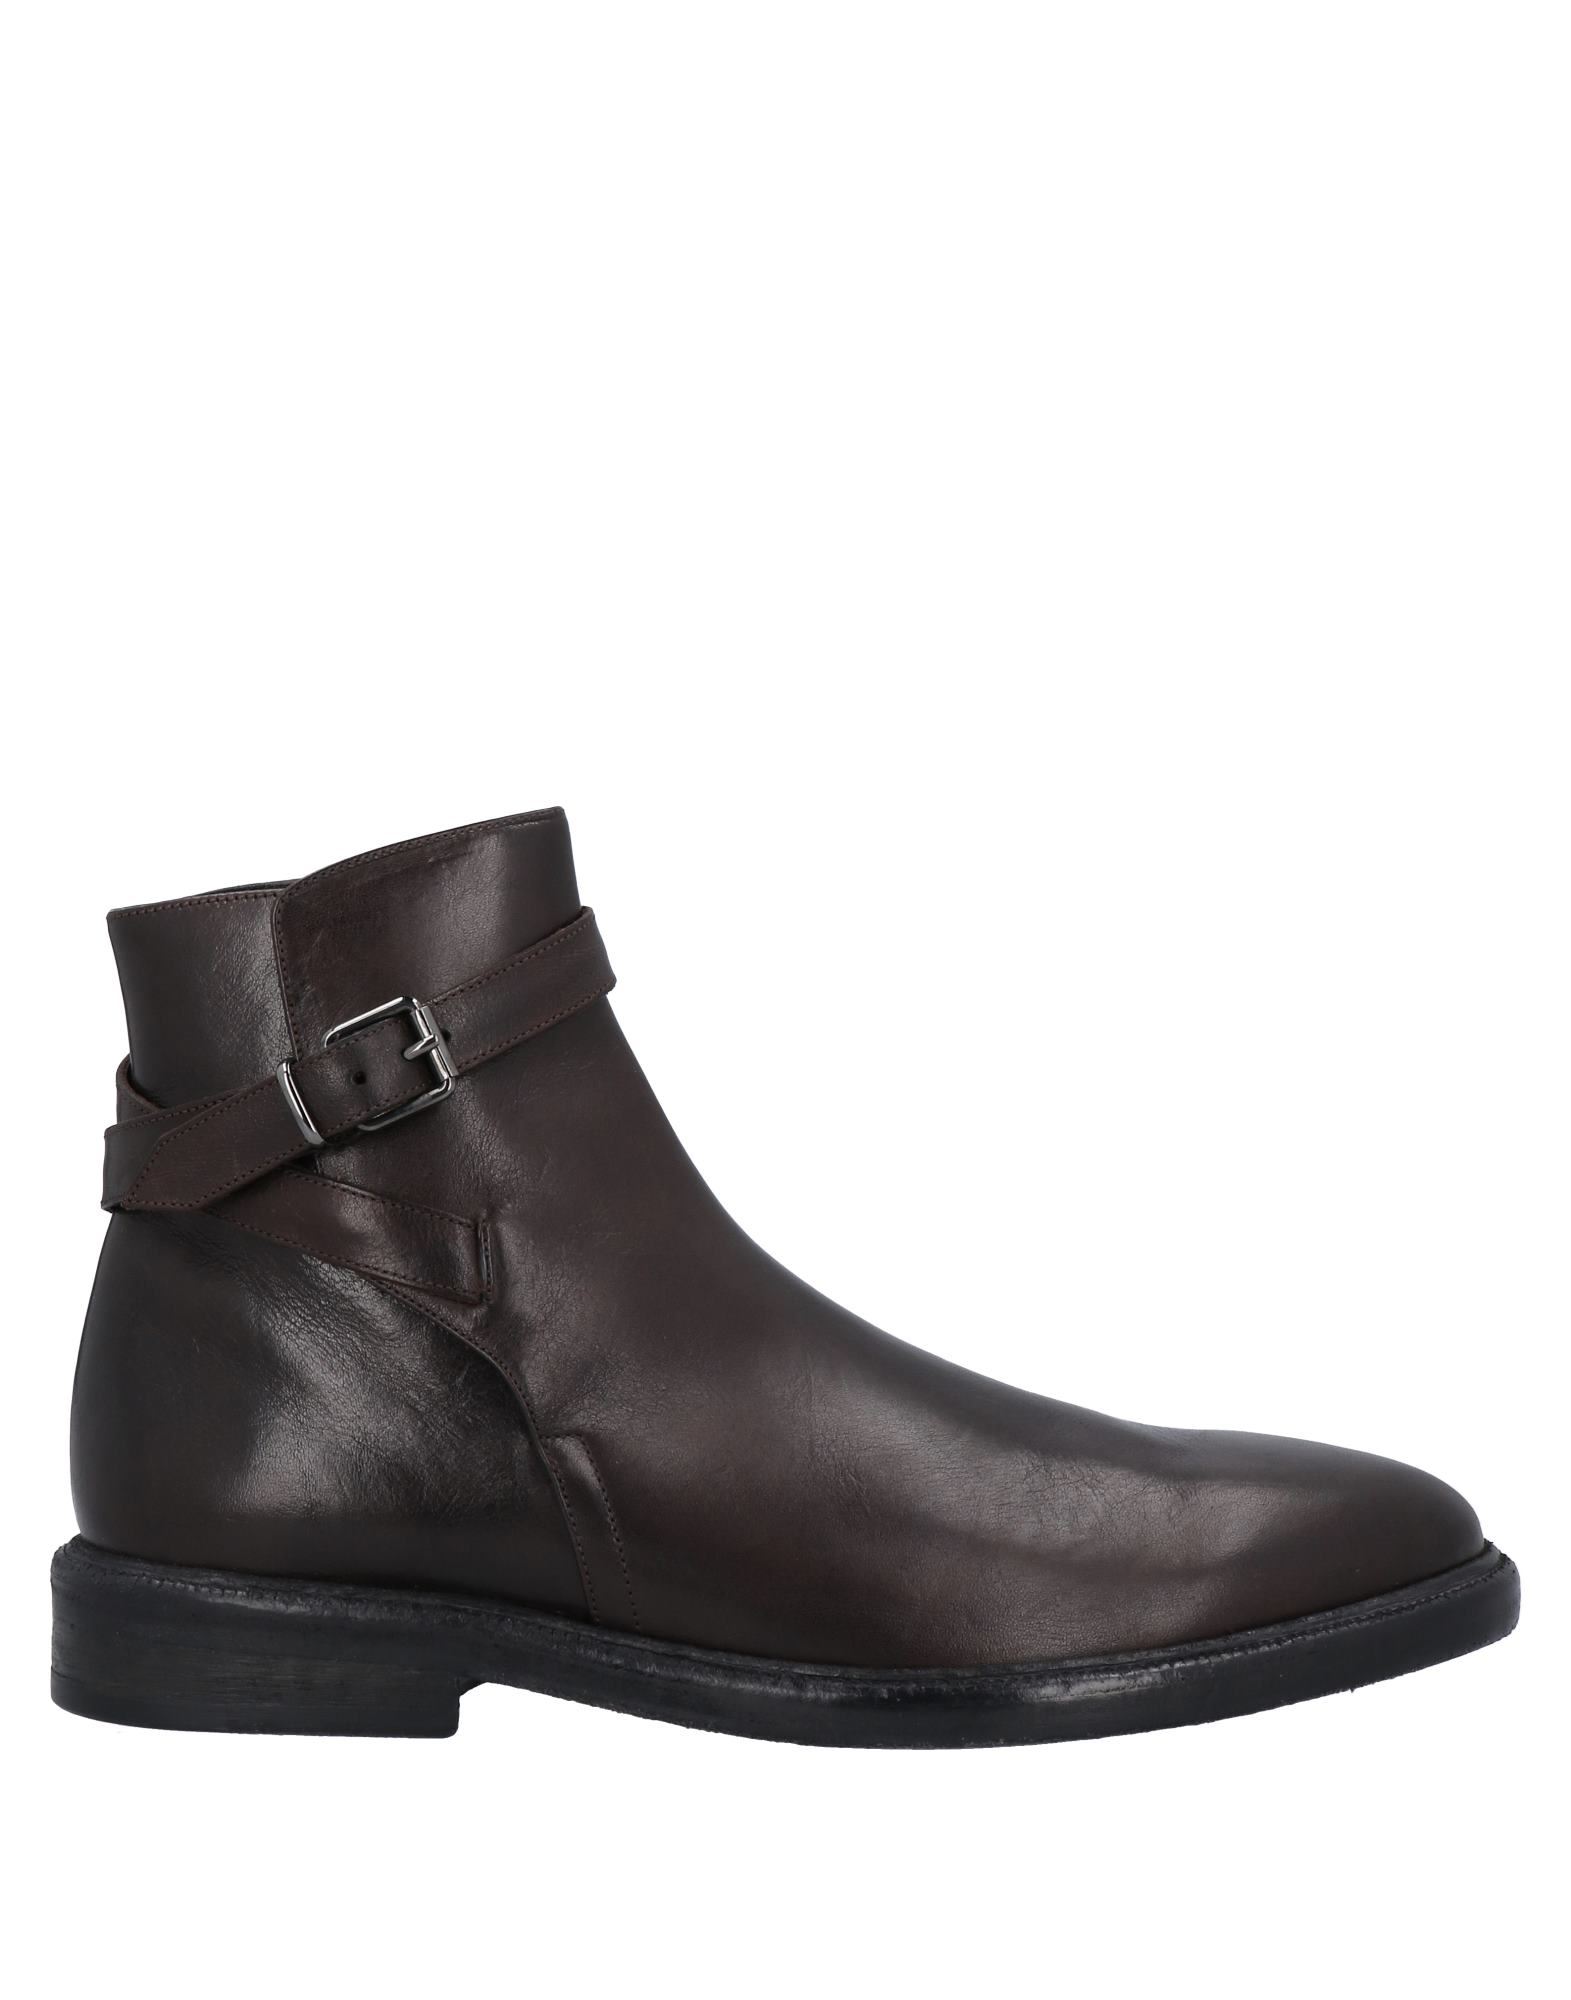 Burberry Ankle Boots In Dark Brown